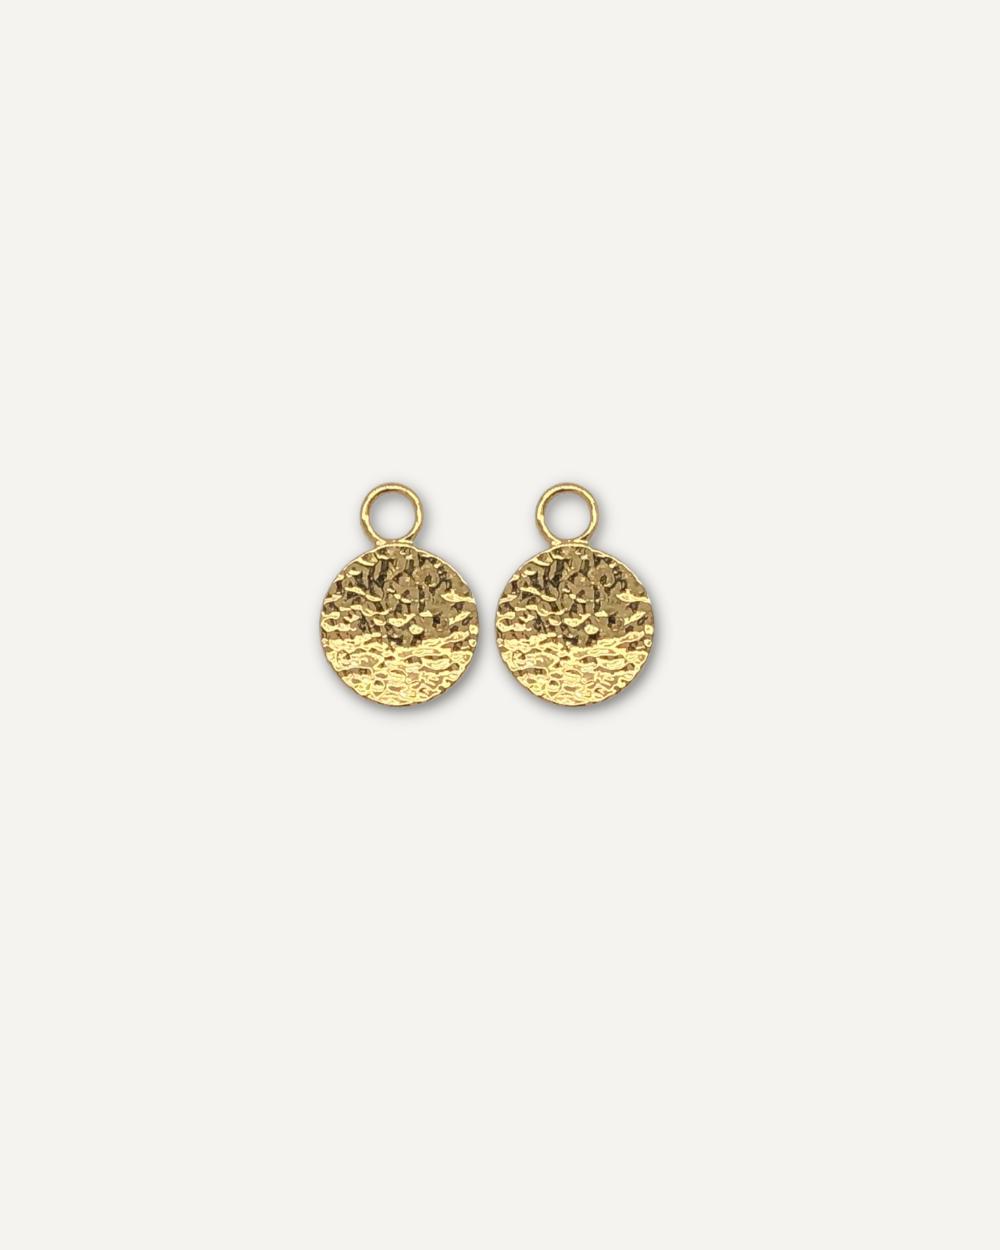 Removable earring charms with hammered finish on cream background.